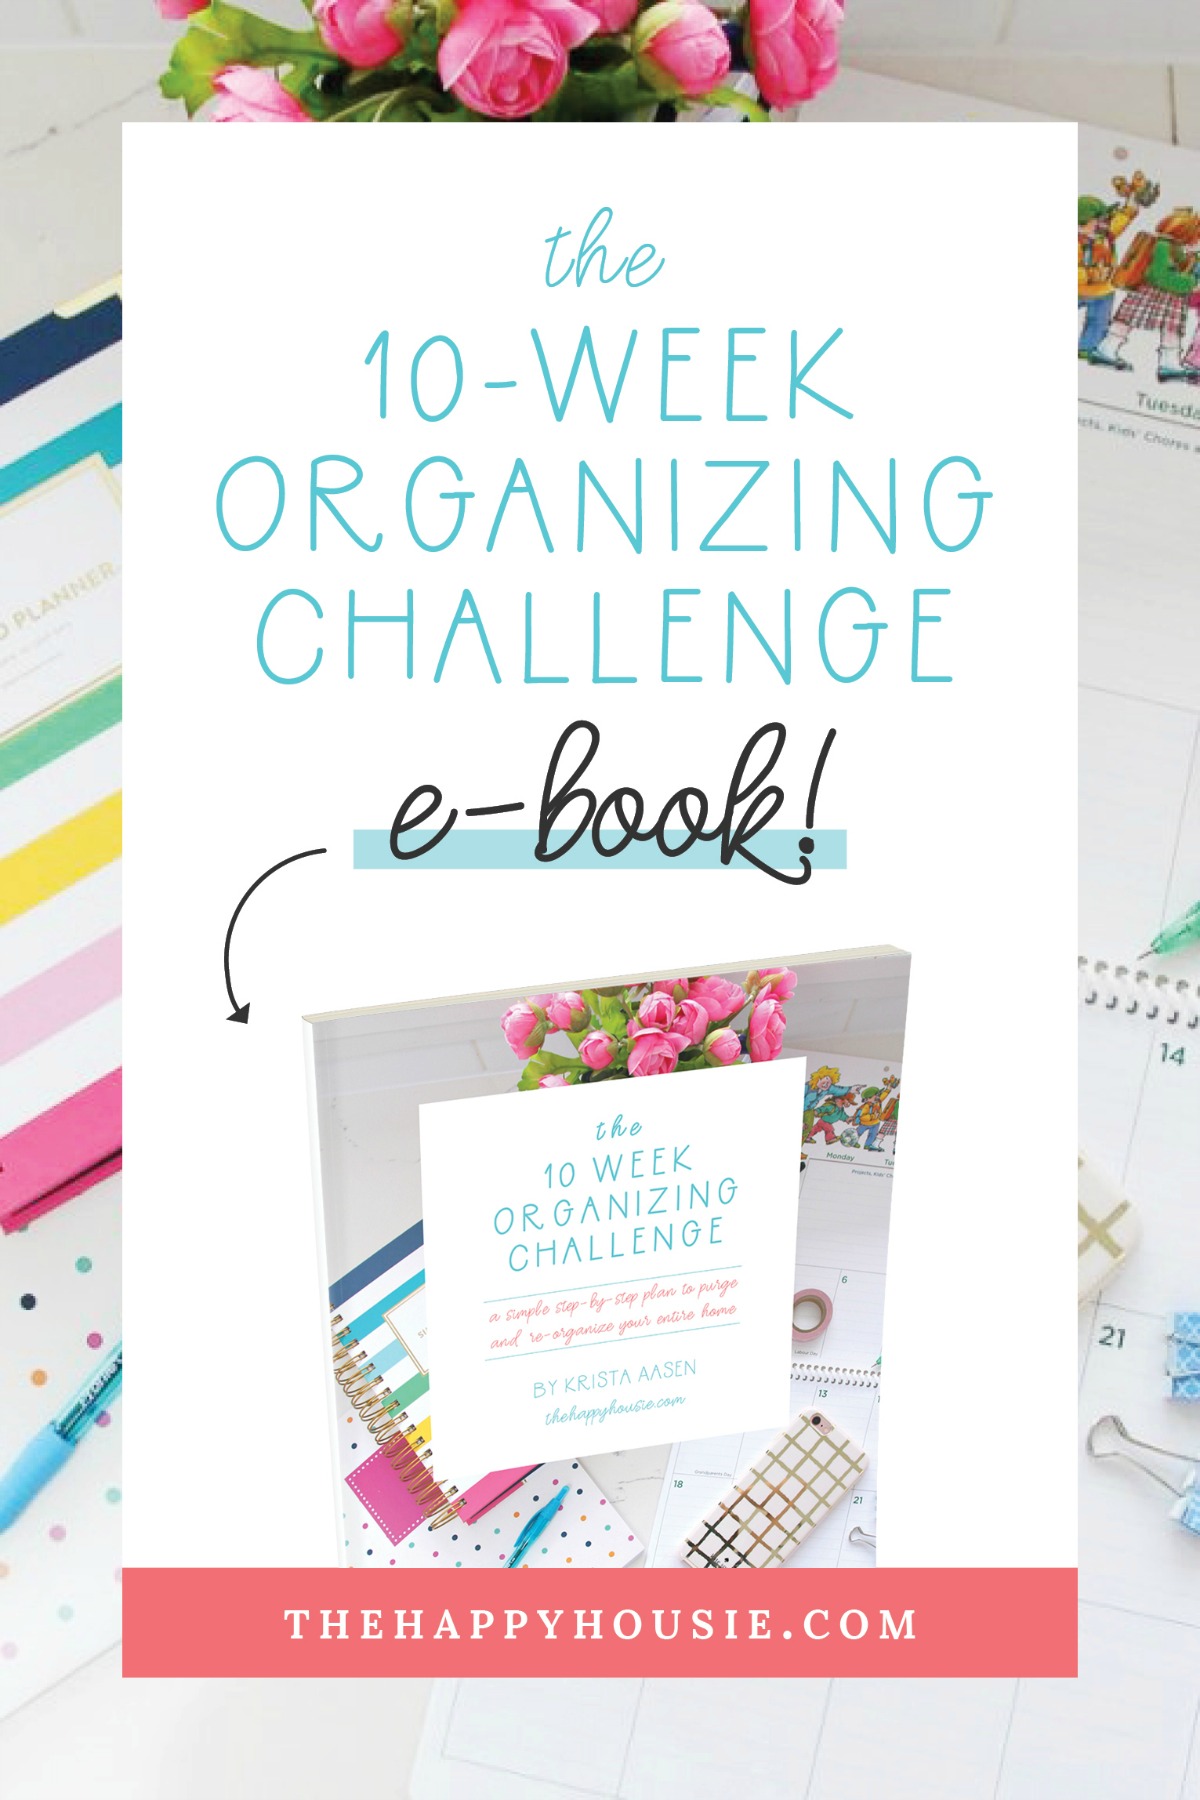 The 10-Week Organizing Challenge E-Book graphic.